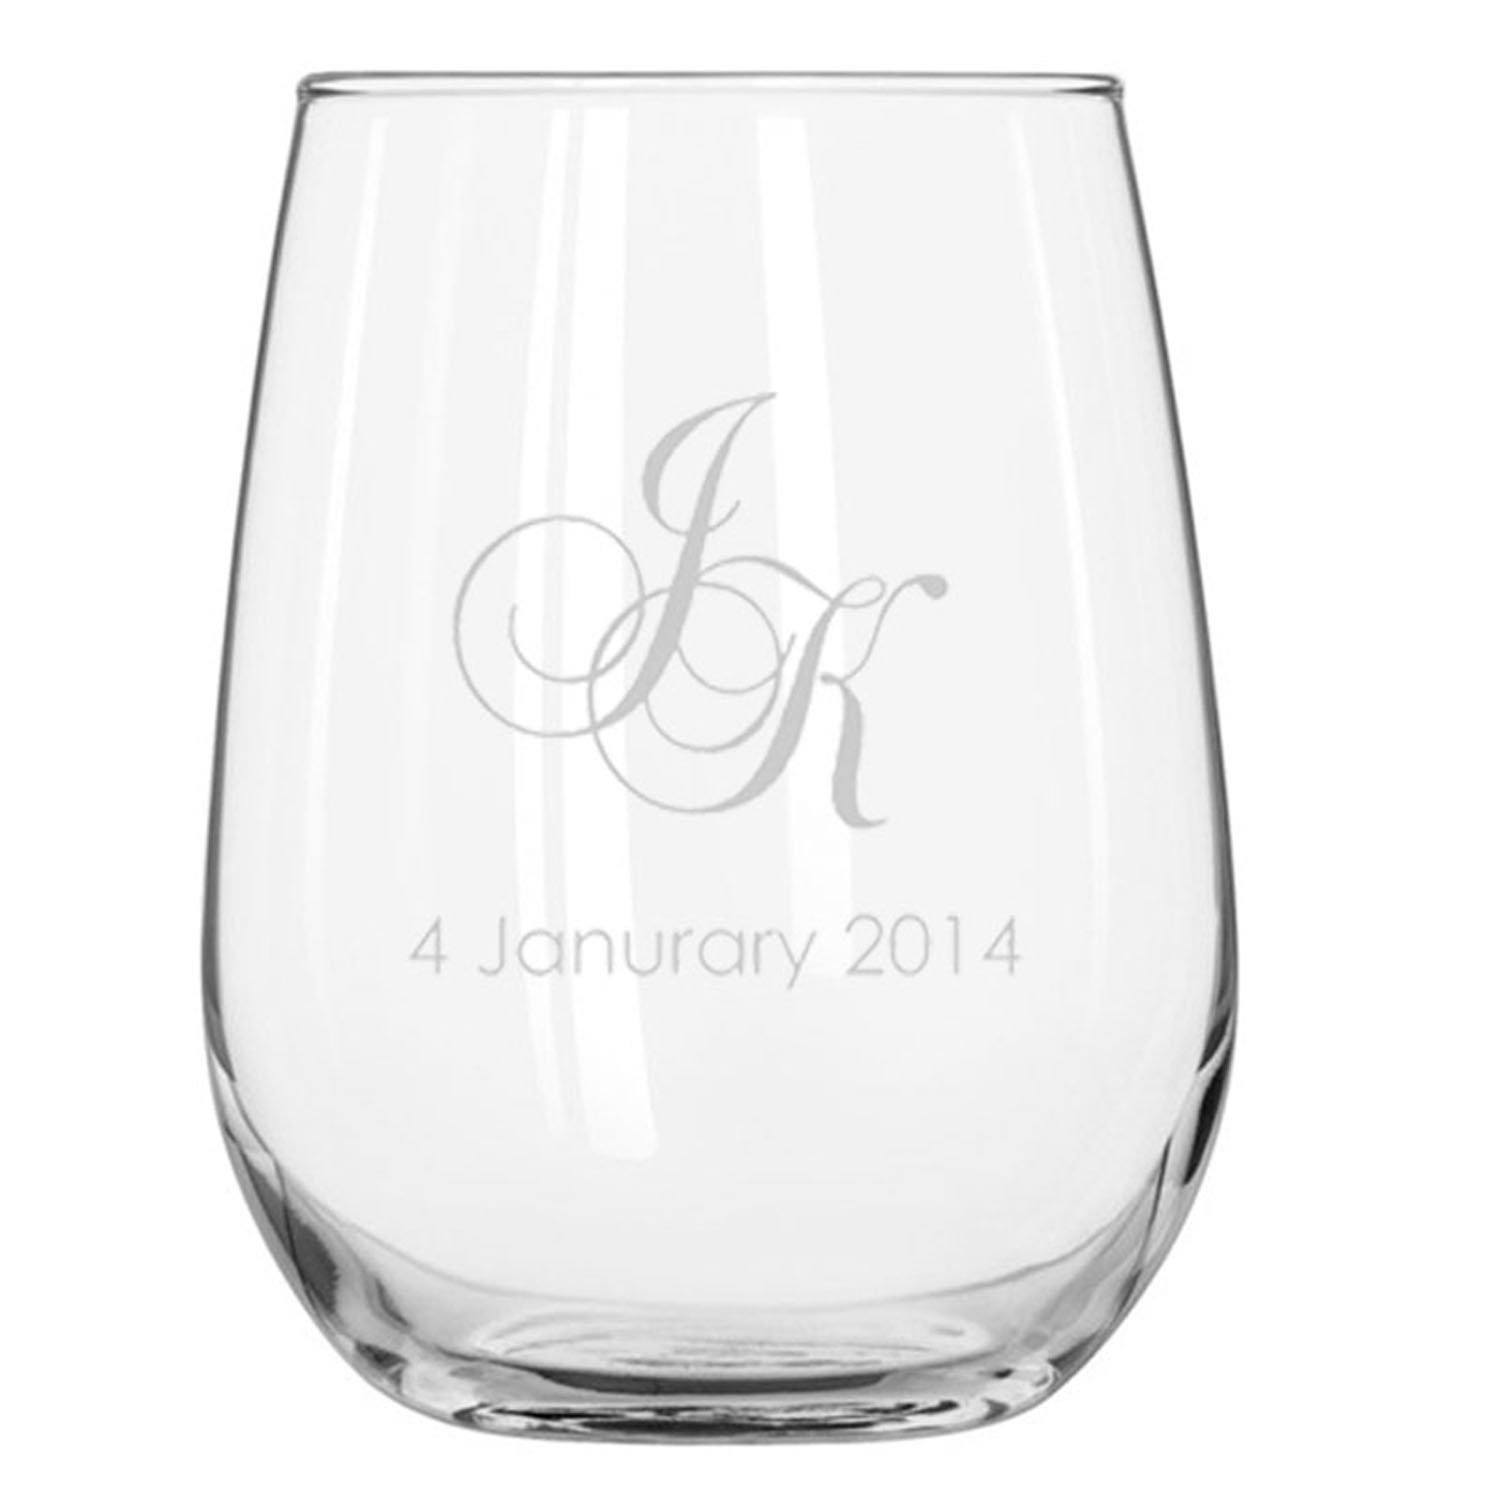 Engraved Libbey Stemless Wine Glasses 503ml Personalised Glasses Engrave Works 